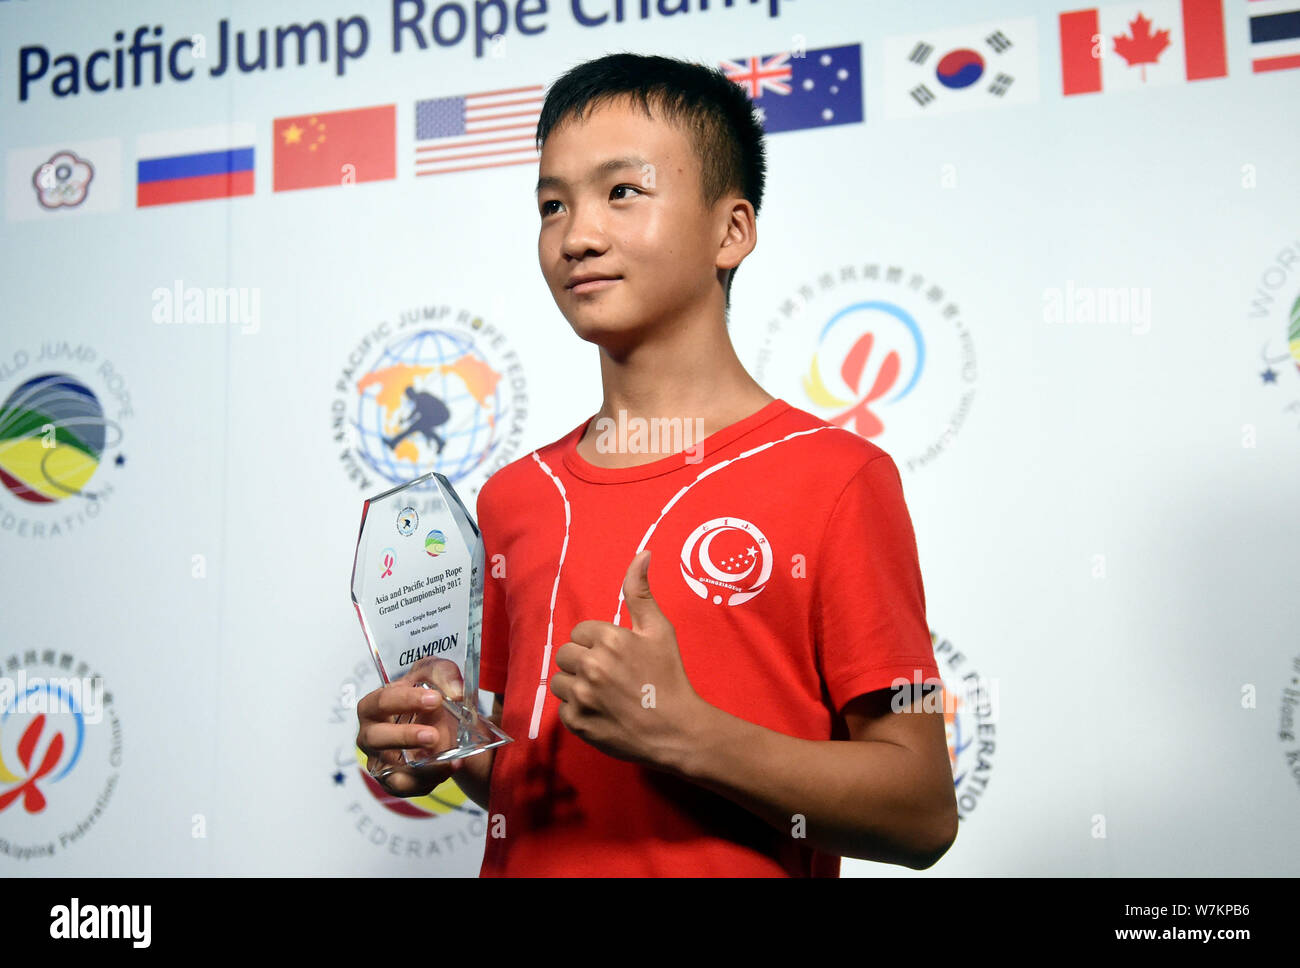 Uventet Arving Kabelbane Cen Xiaolin, a 13-year-old boy from south China's Guangdong, poses with his  trophy after winning the champion during the Asia and Pacific Jump Rope Ch  Stock Photo - Alamy